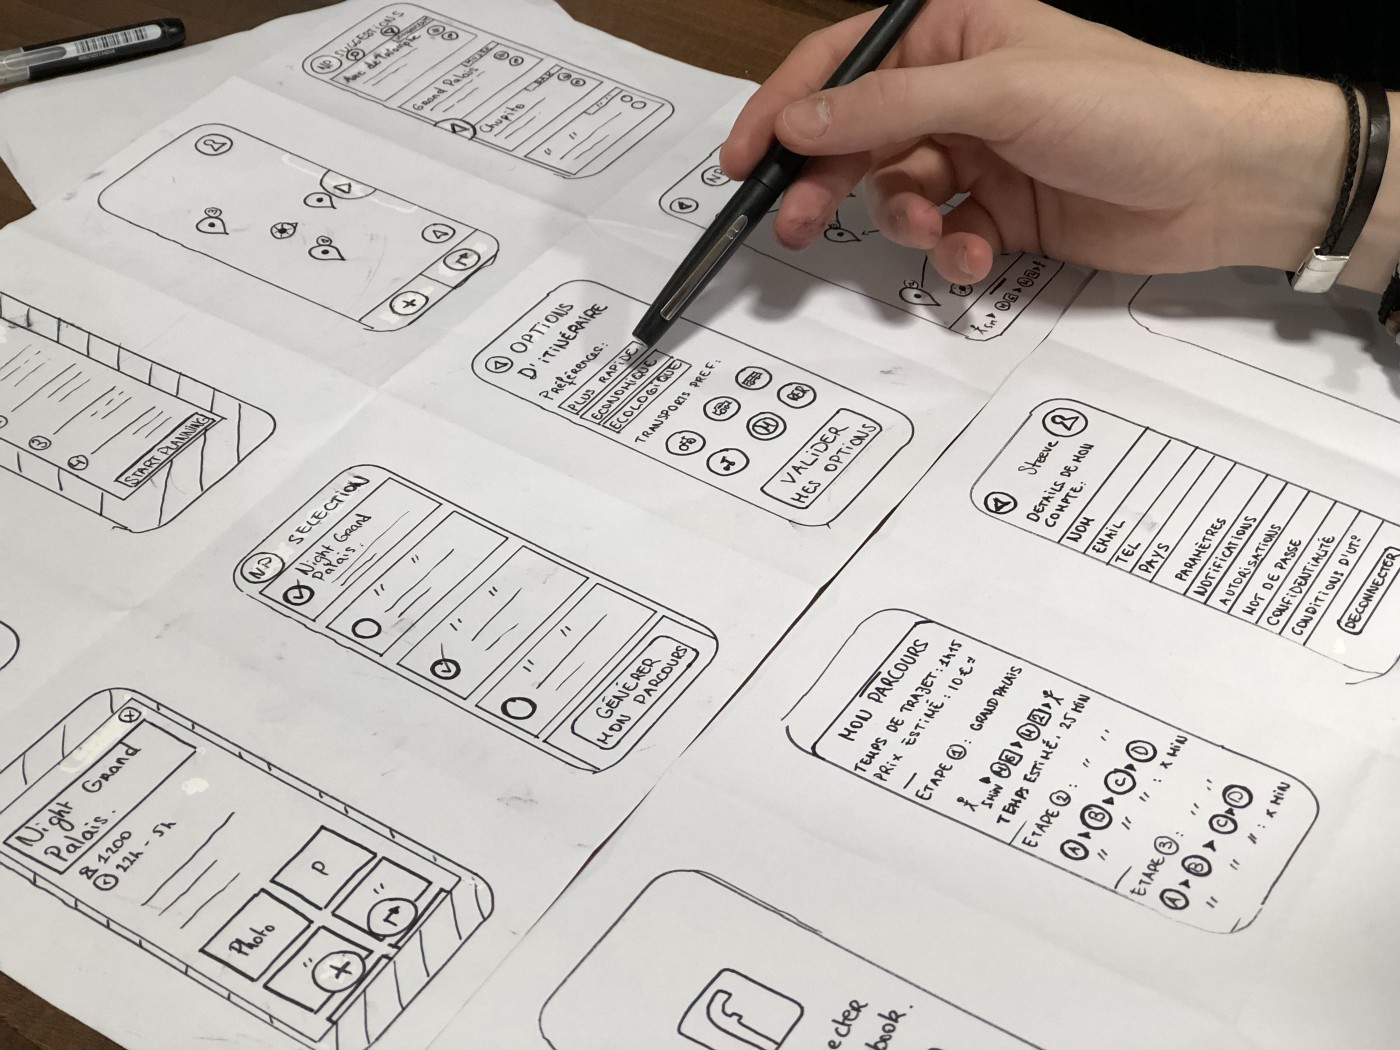 Handdrawn wireframes and sketches